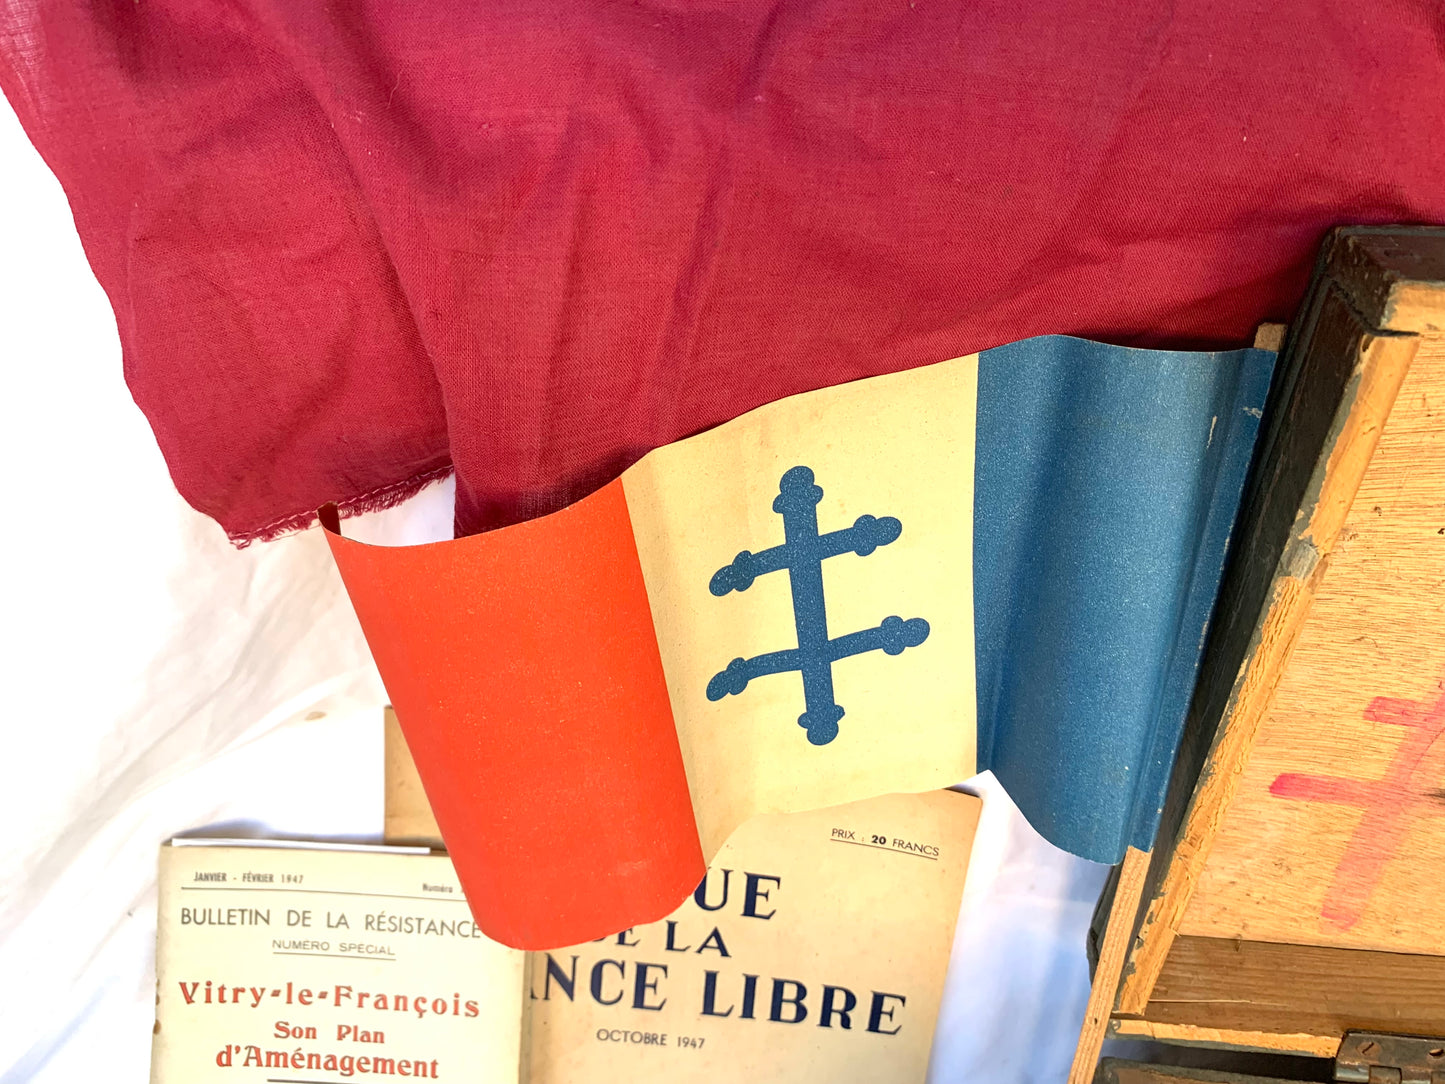 A Stunning FFI/Resistance Grouping to Andre Cattoen including Fighting Knife, coded newspaper, ID Cards, FFI Flag and much more.